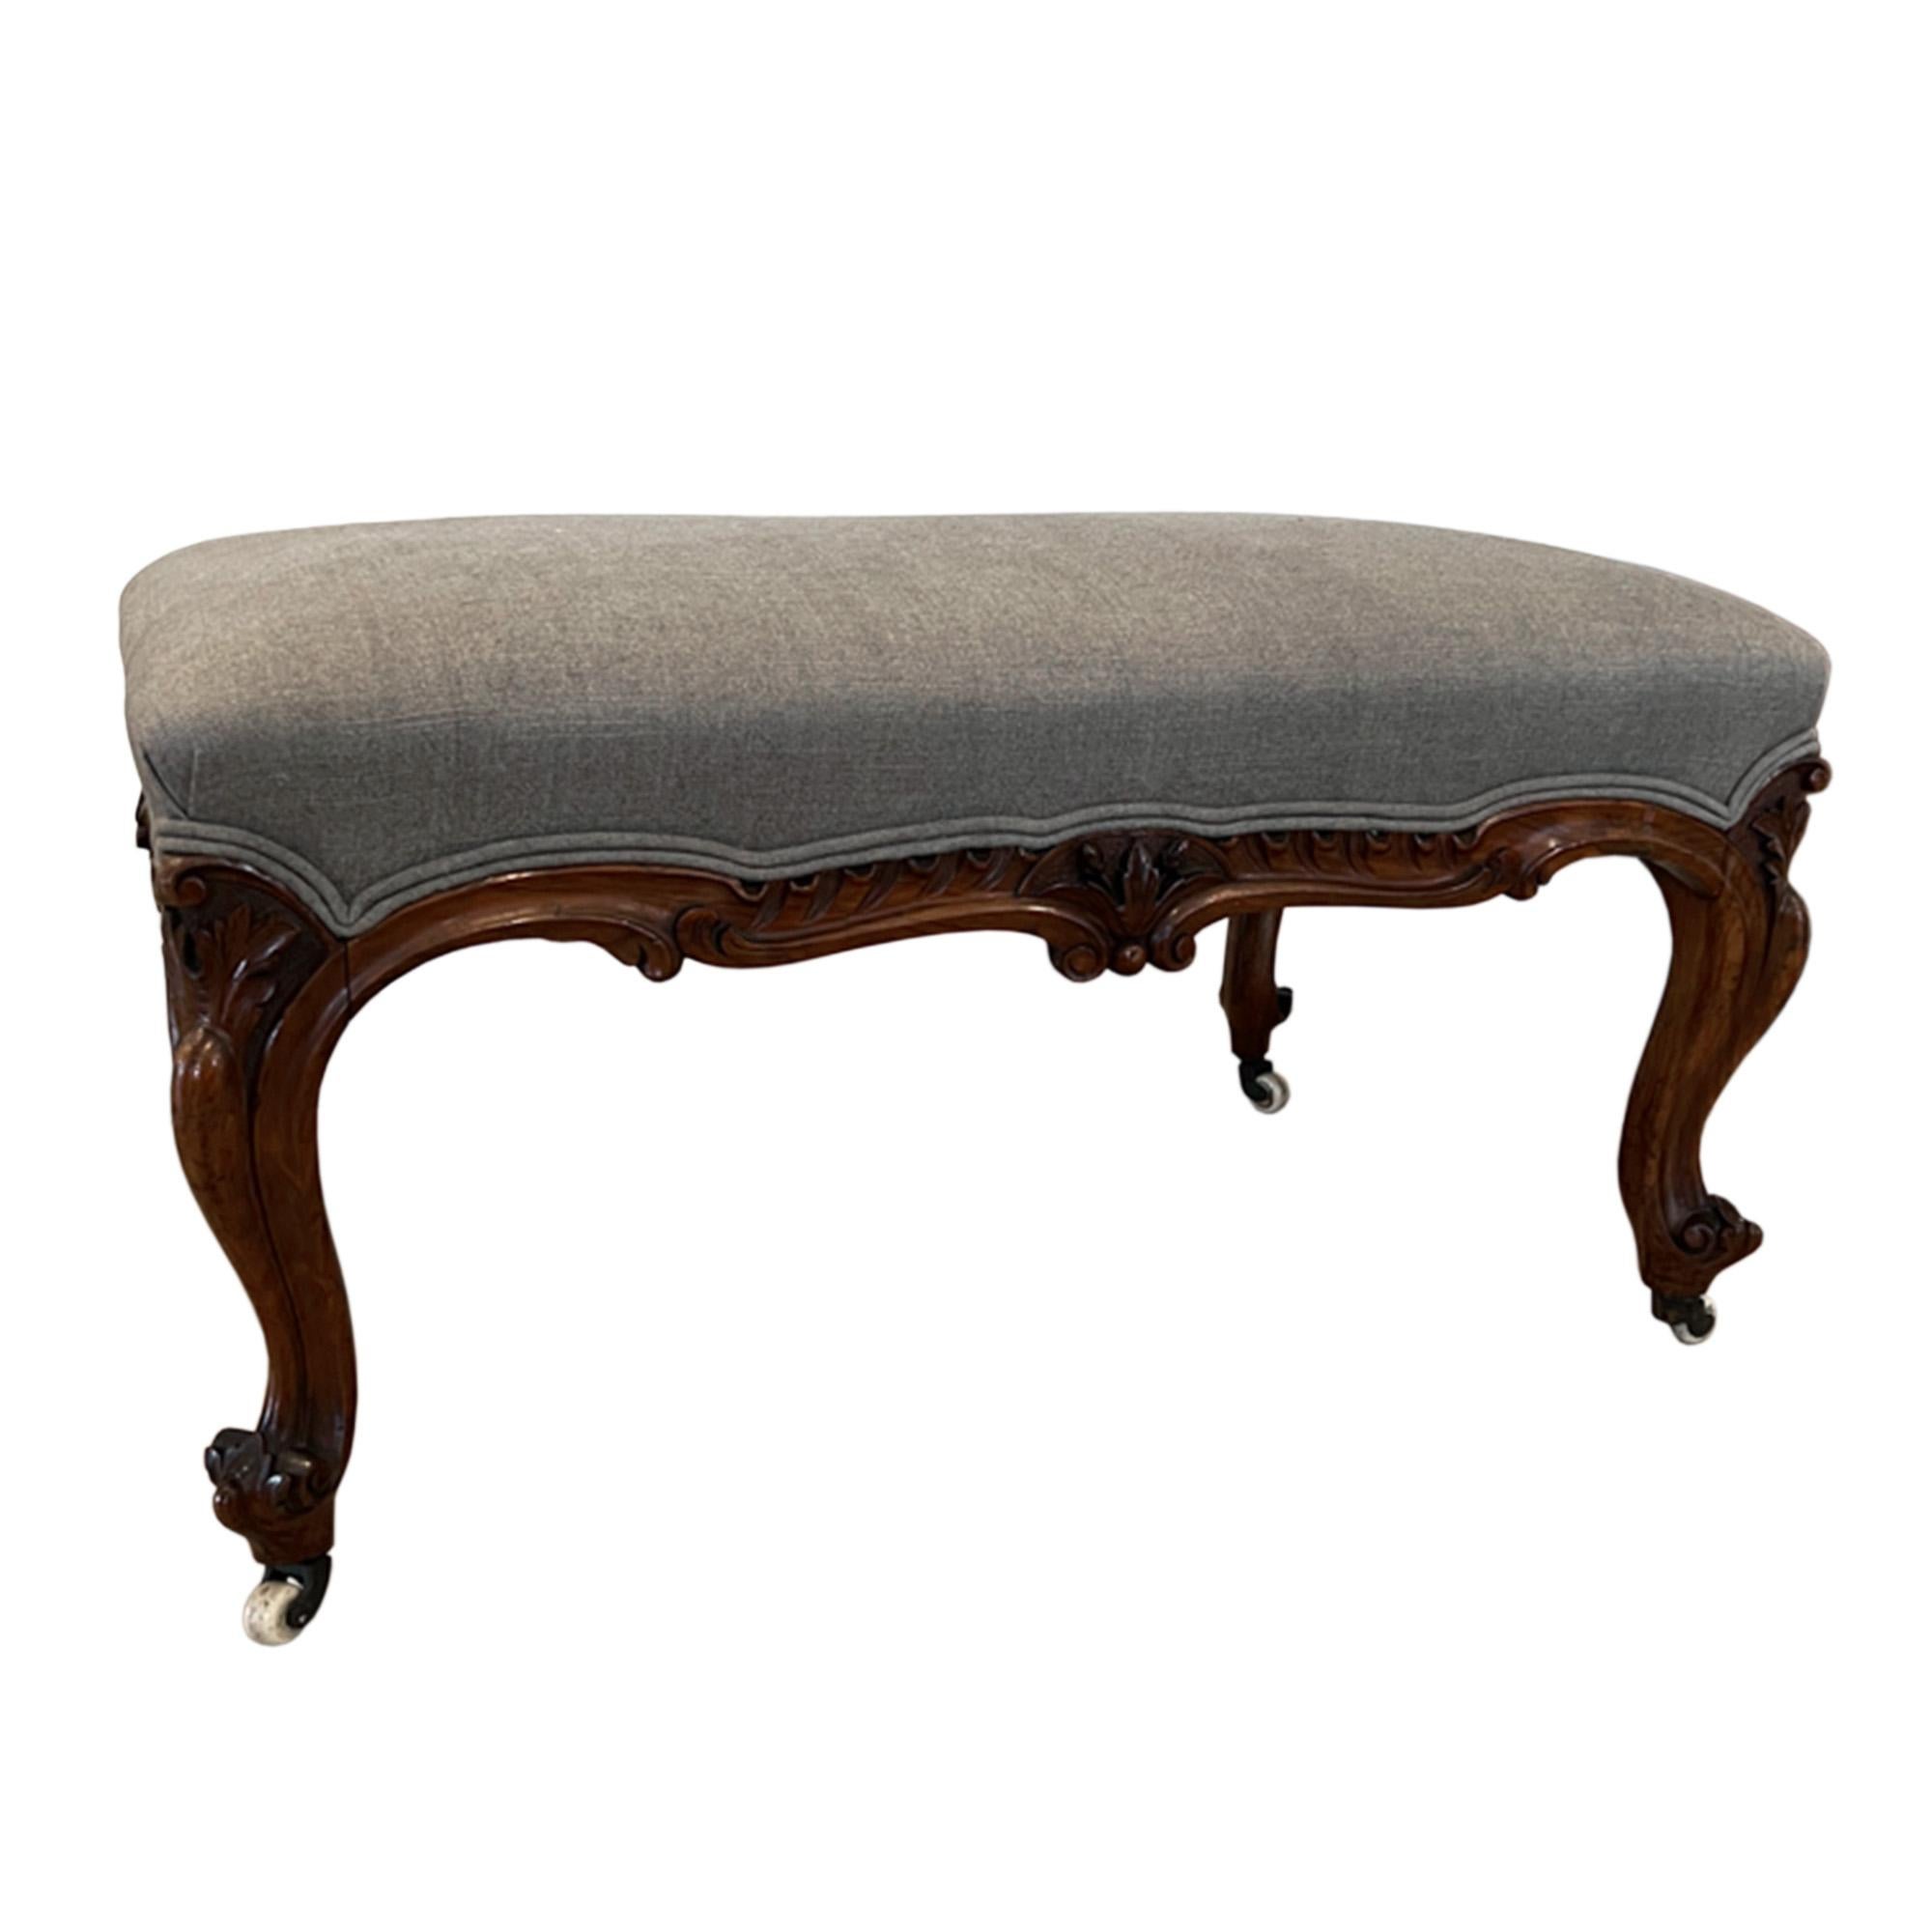 This large upholstered foot stool was made in England in the 19th century. It is beatifully carved all the way around and sits on the original ceramic castors. 

We have reupholstered this piece in Mark Alexander linen.